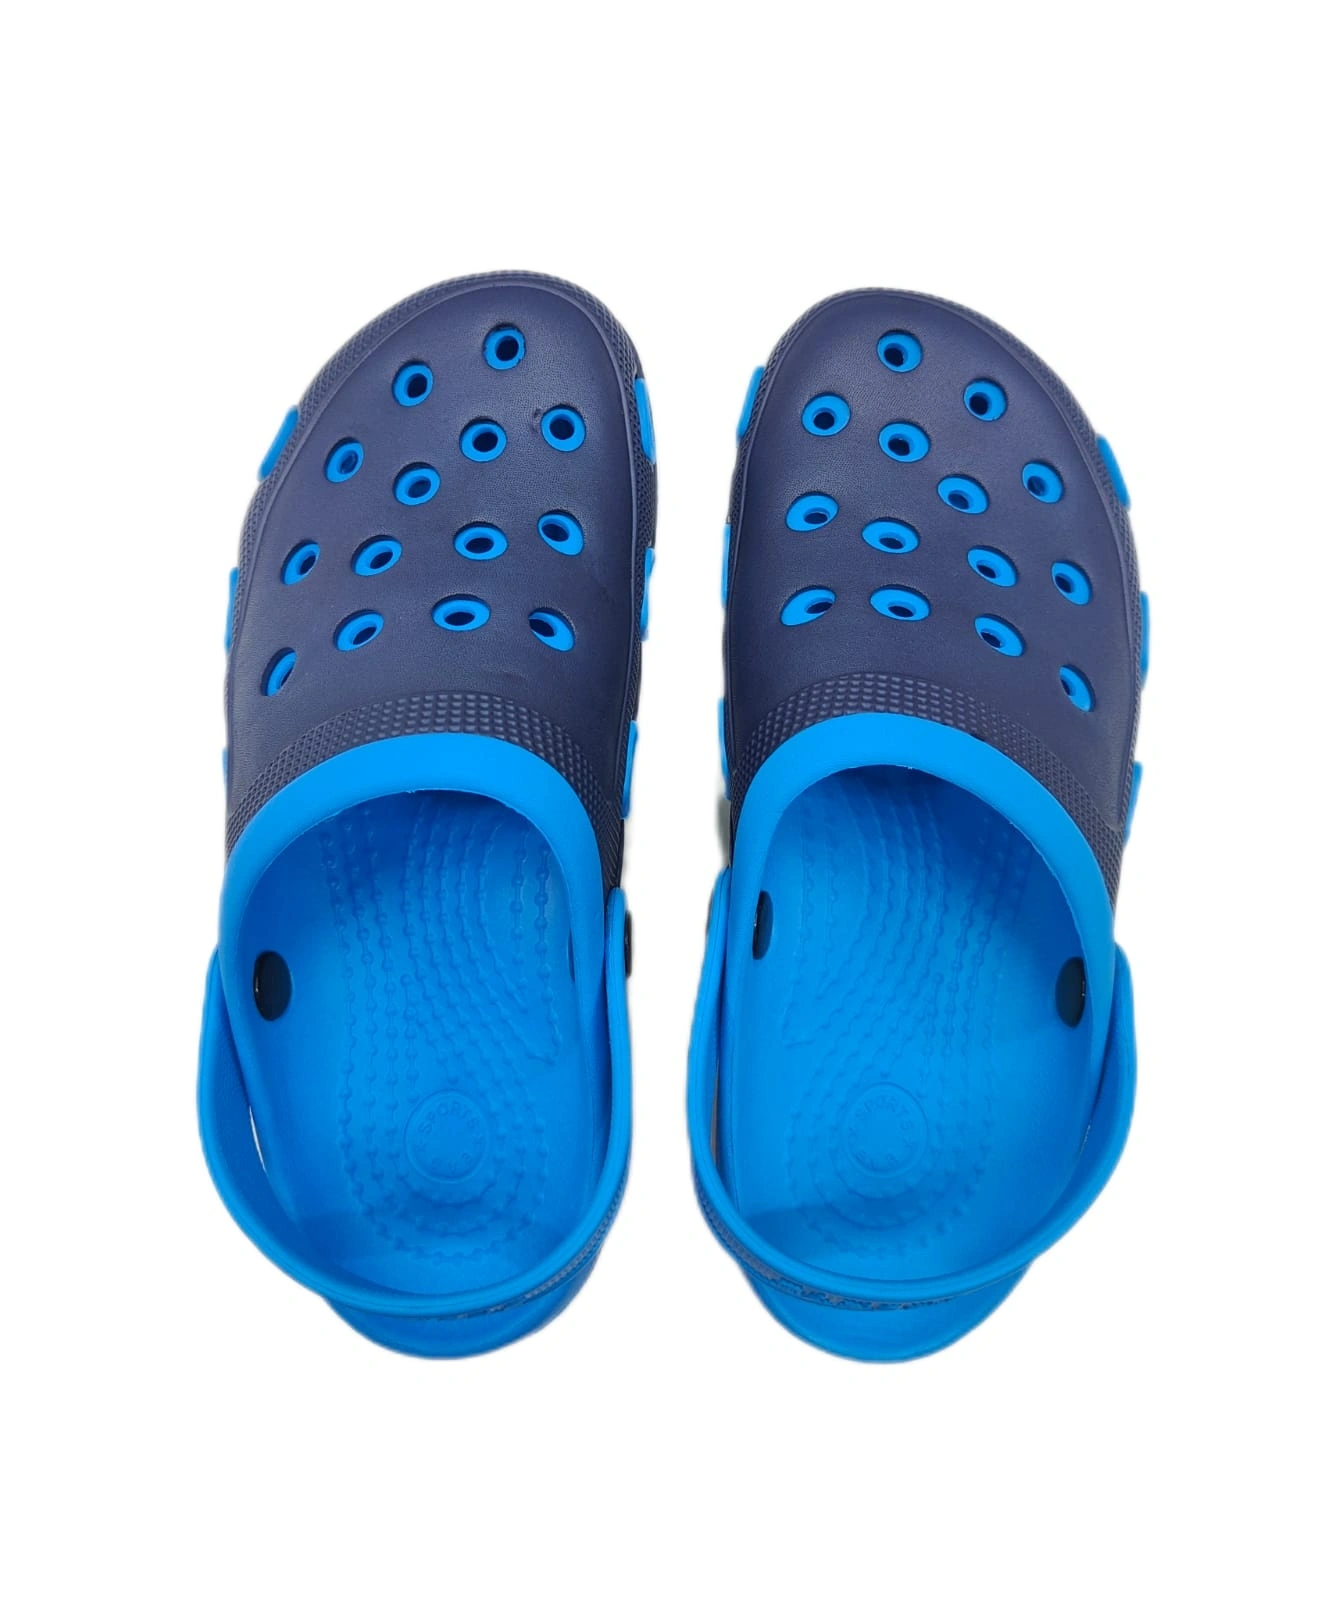 Clog Sandals for Men and Women: Comfortable, Lightweight Design with Durable Upper and Slip-Resistant Outsole for All-Day Wear-388268828072